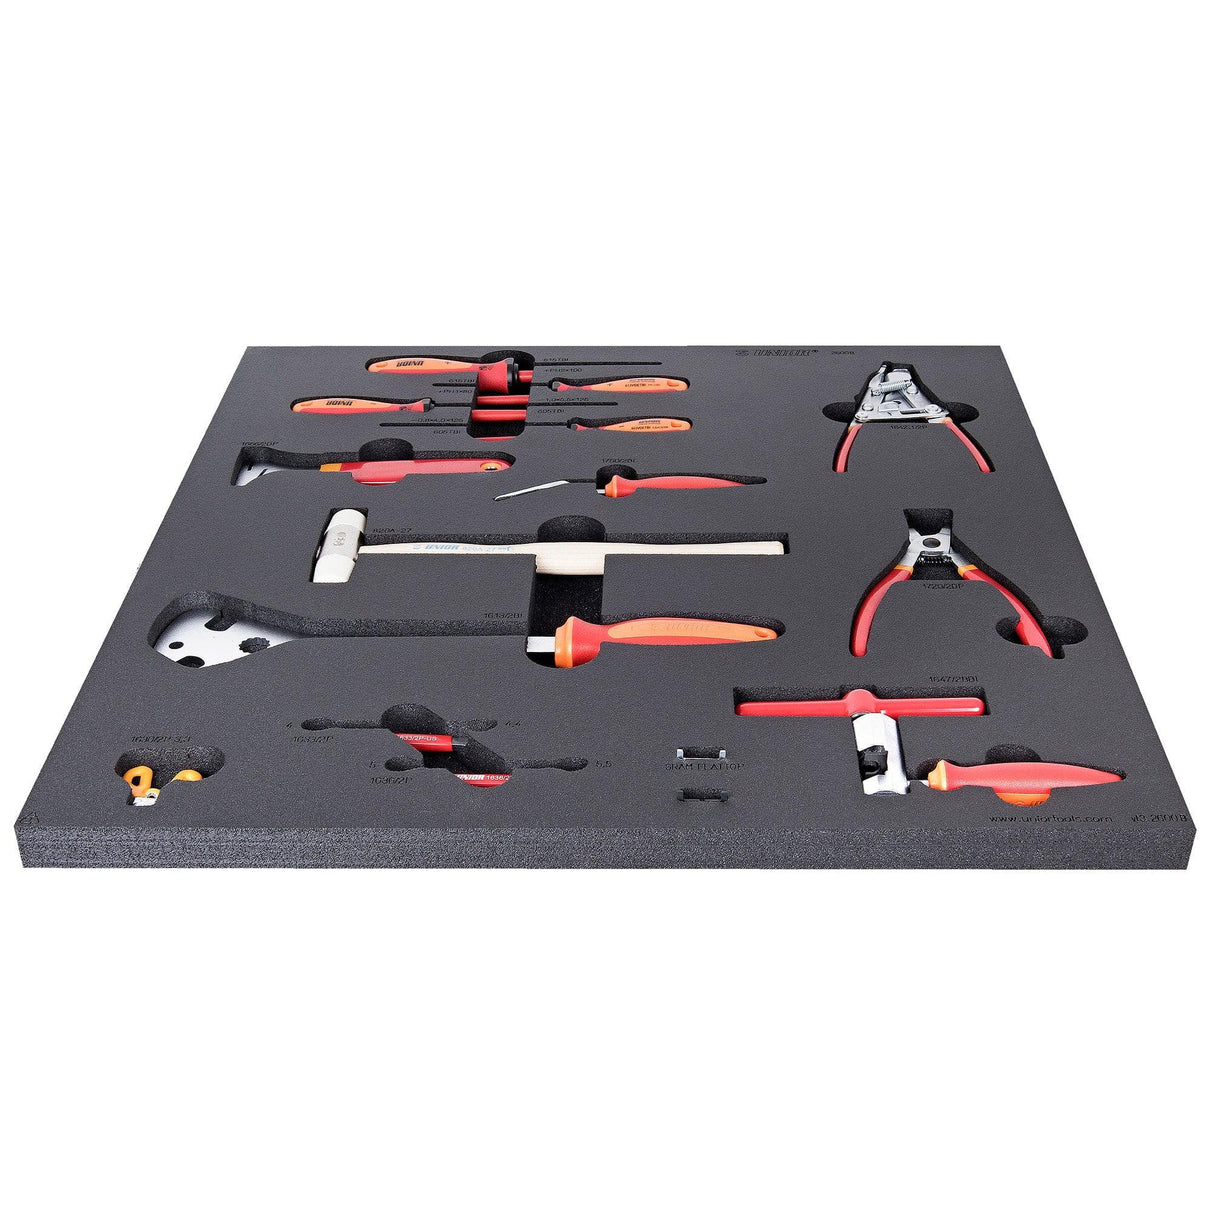 Unior Set Of Tools In Tray 3 For 2600B: Red